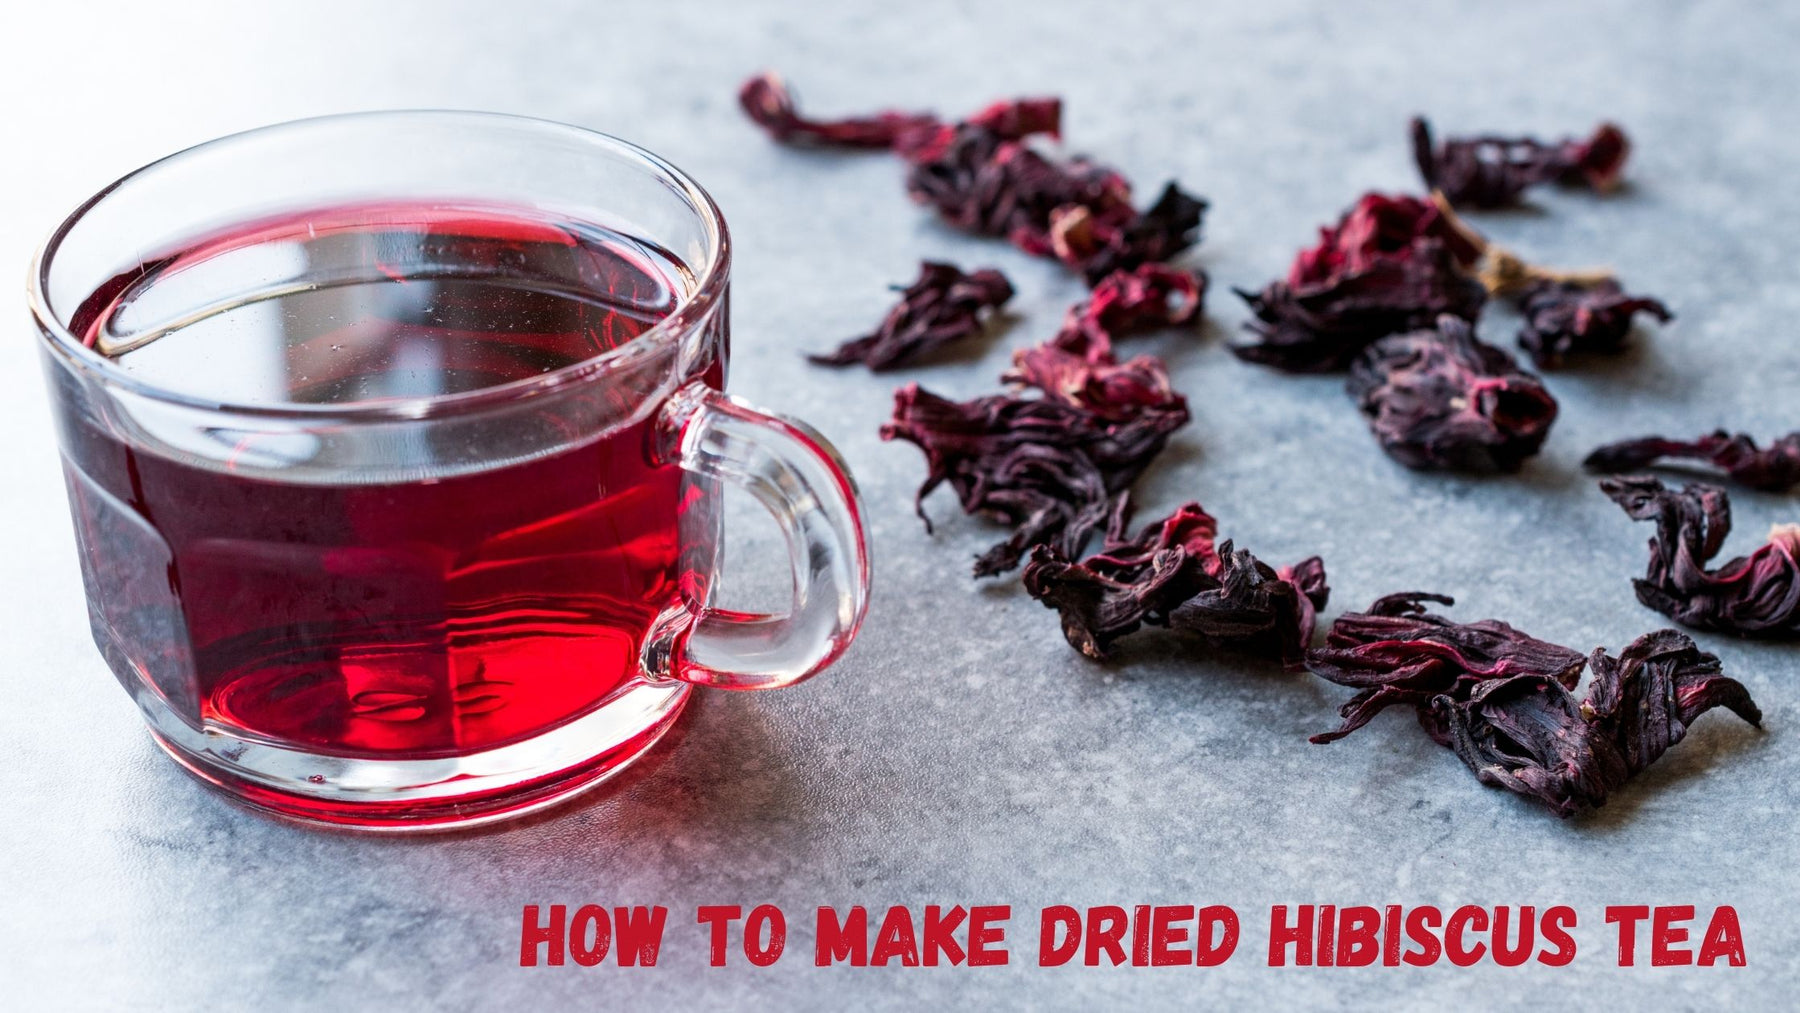 How To Make Dried Hibiscus Tea with Zobo Leaves